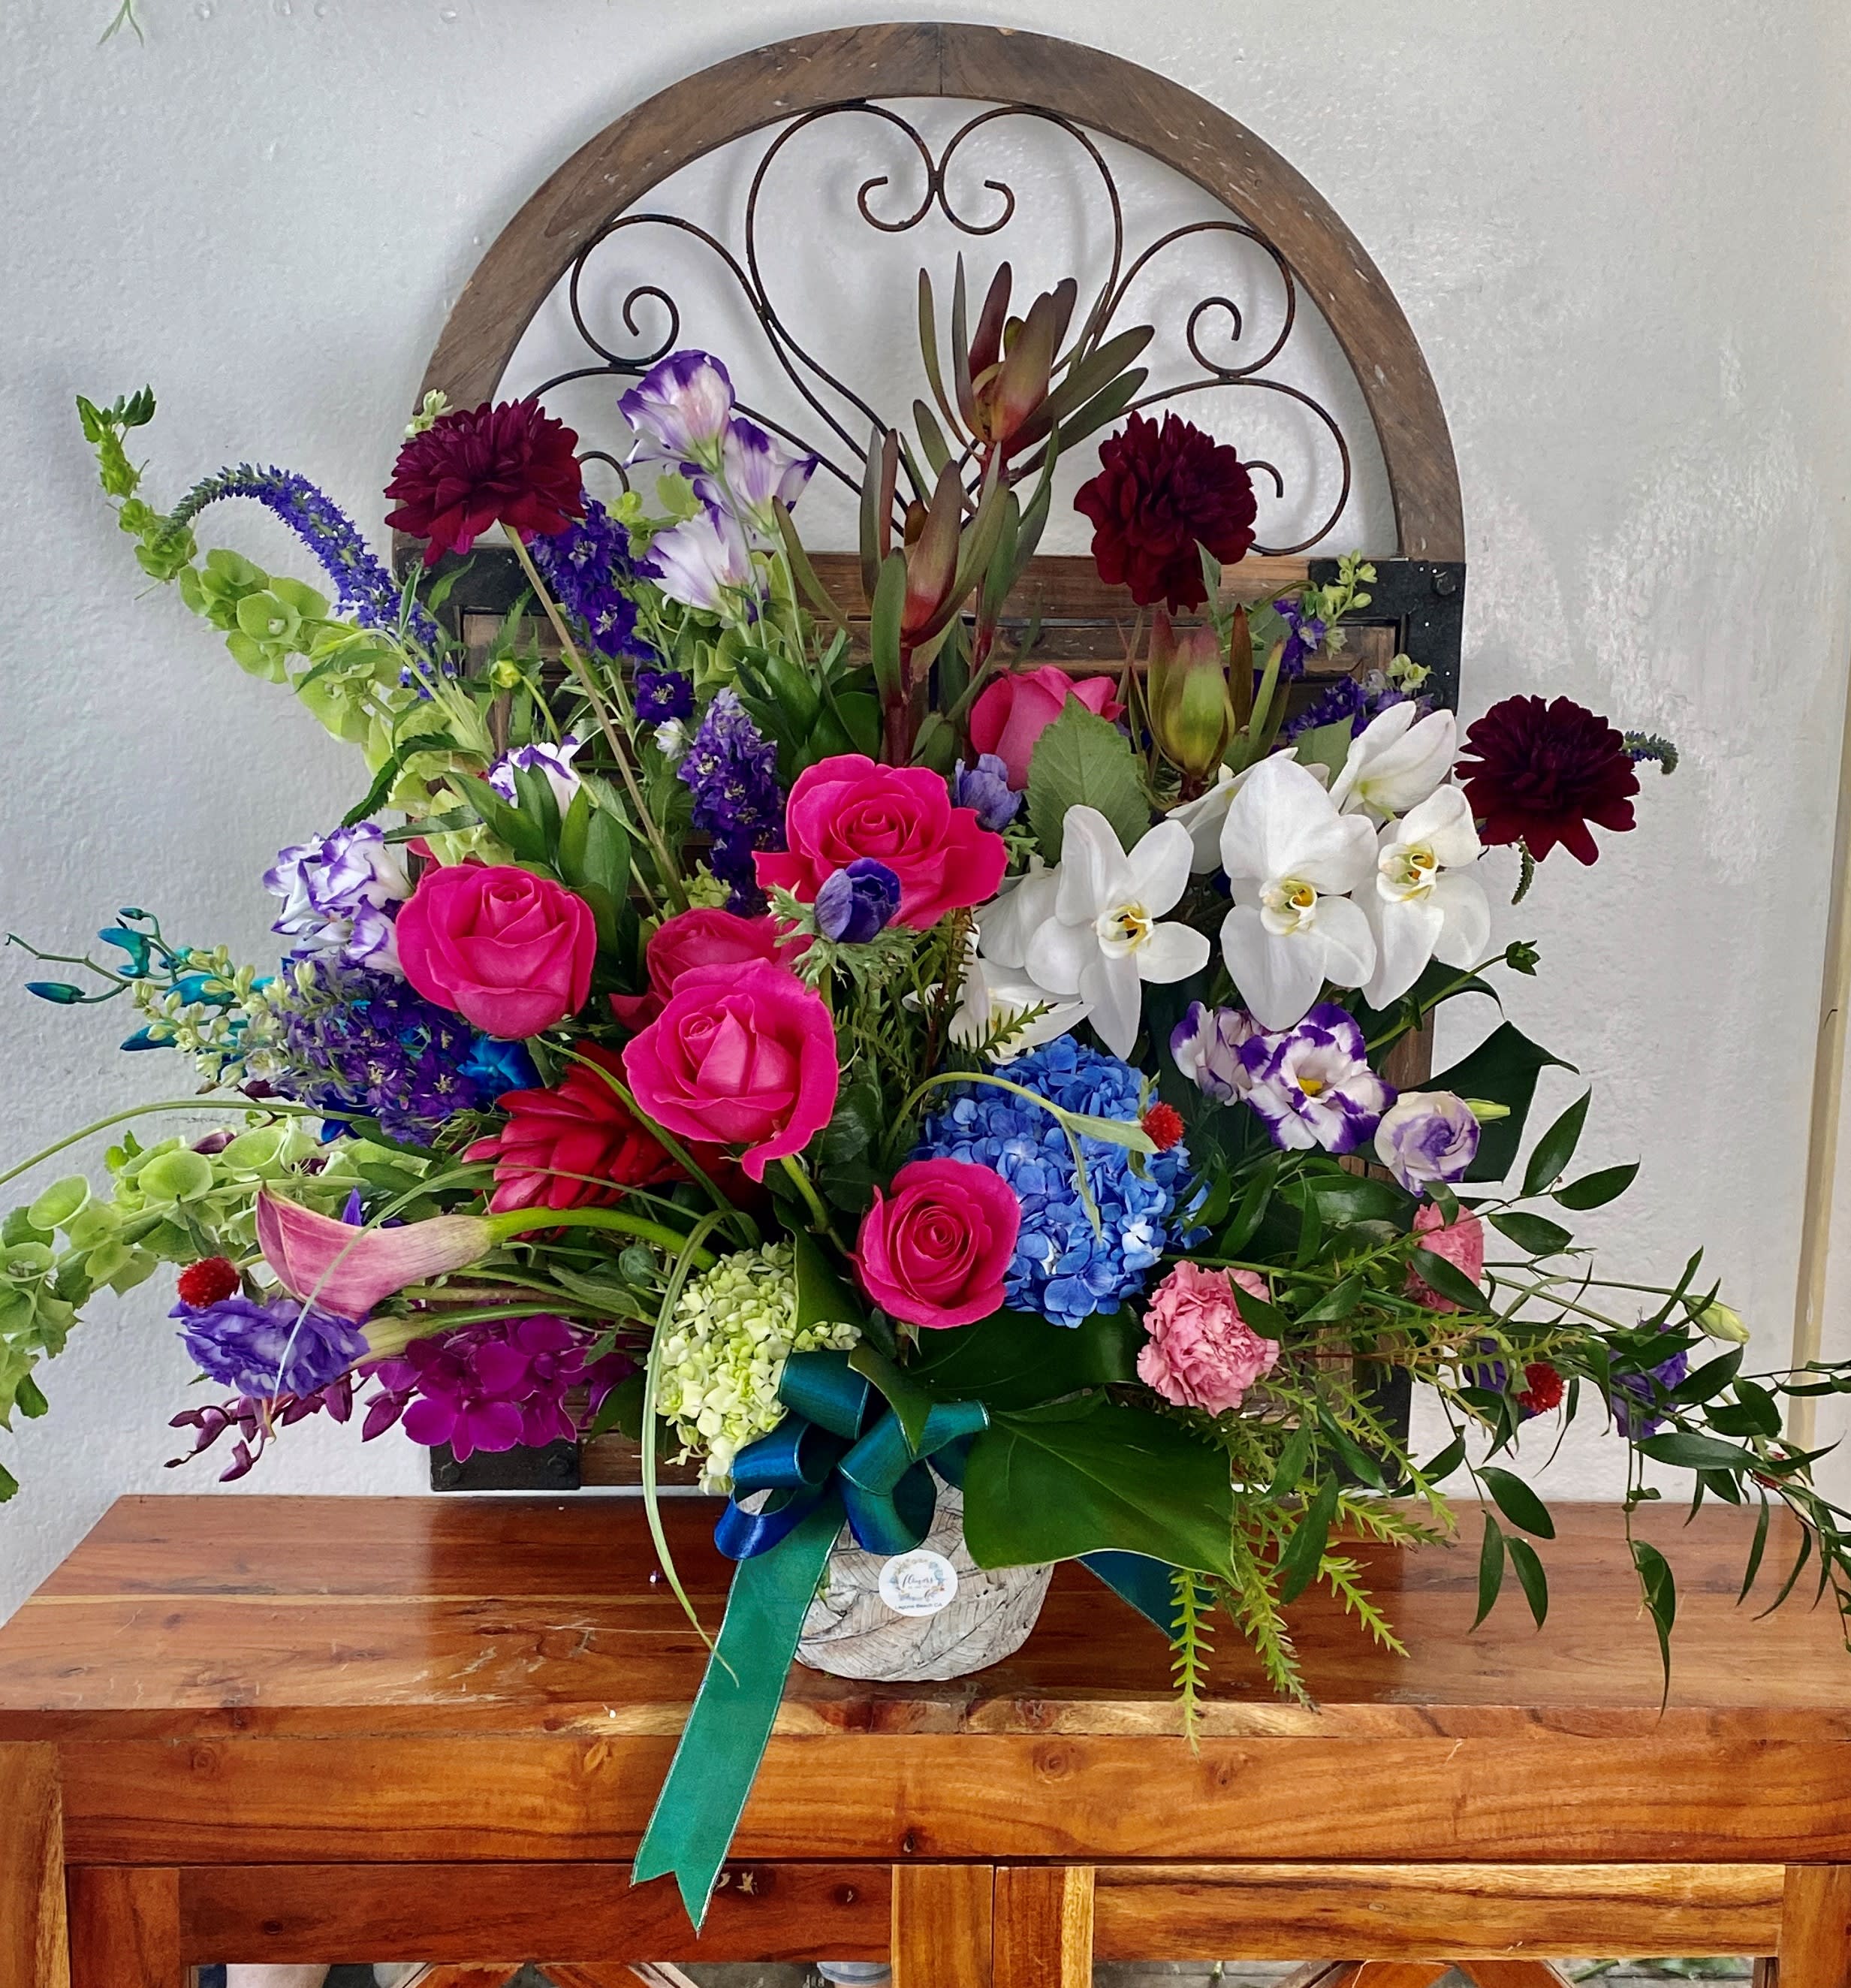 Fairytale  - Wonderful arrangement with magic colors in rustic container.